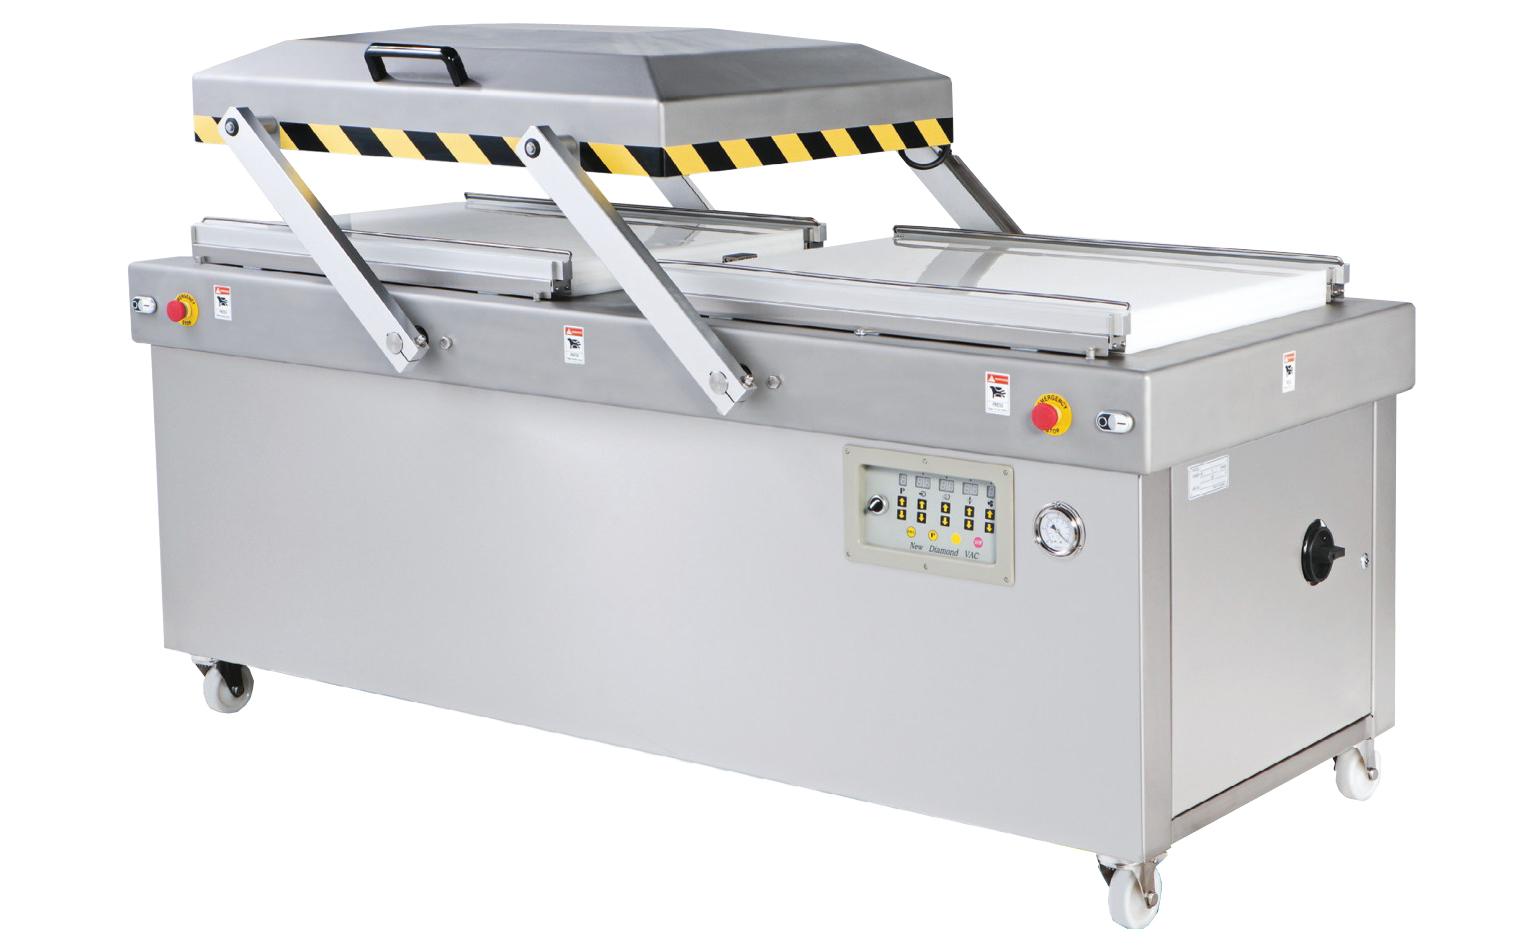 Automatic Heavy Duty Double Chambers Vacuum Packaging Machine